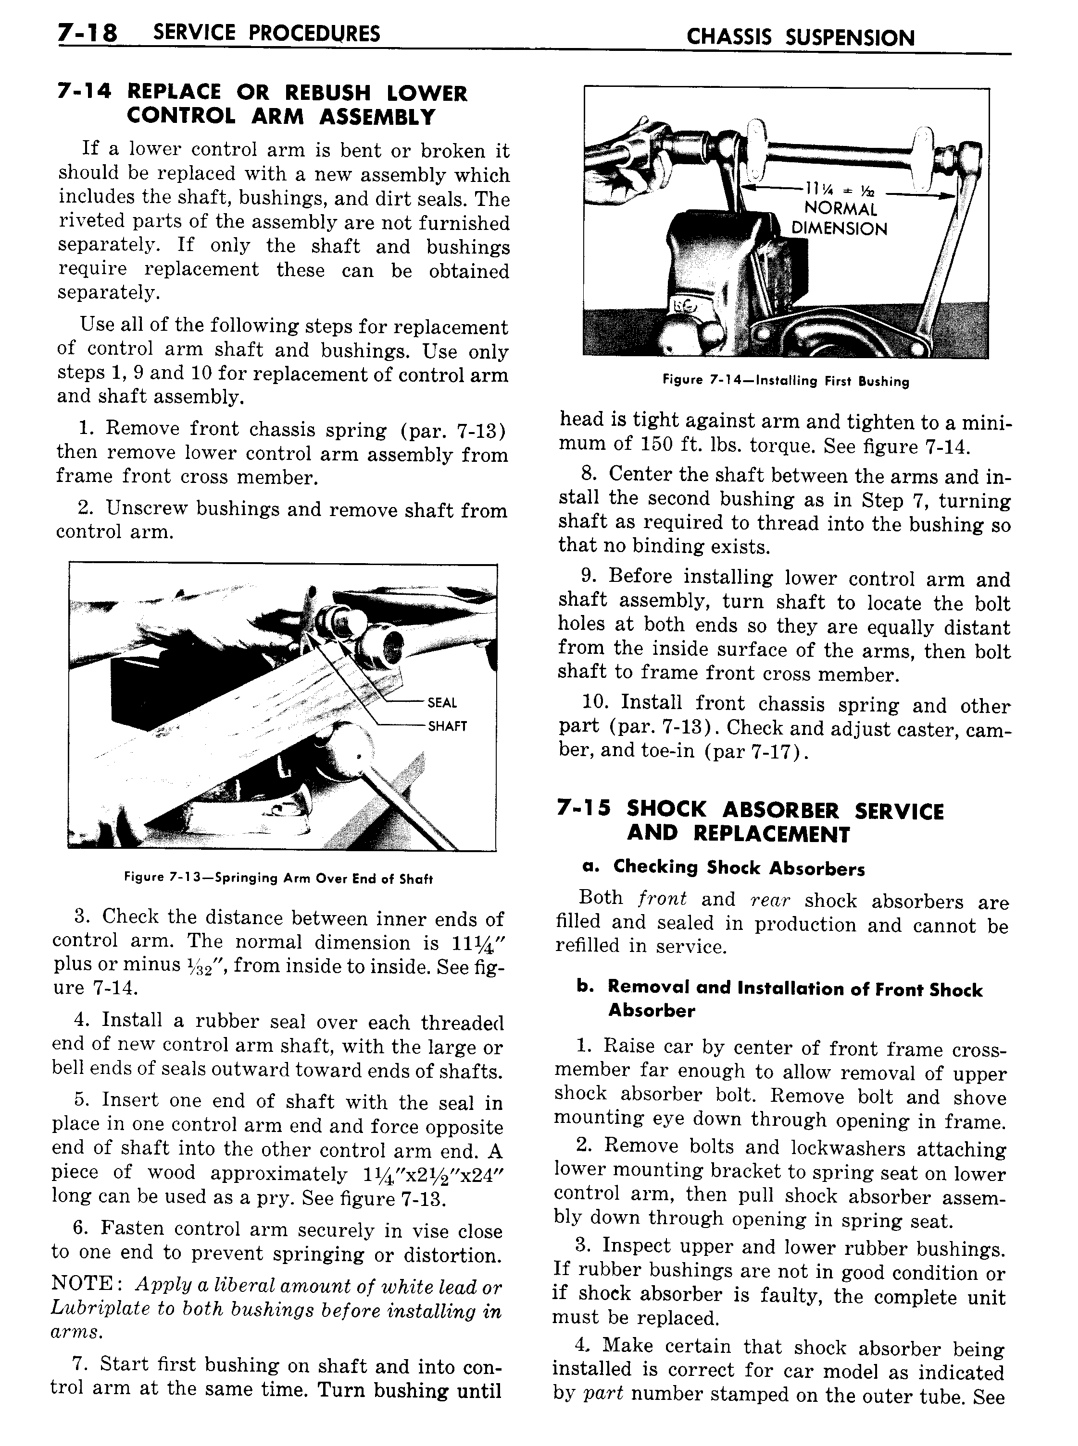 n_08 1957 Buick Shop Manual - Chassis Suspension-018-018.jpg